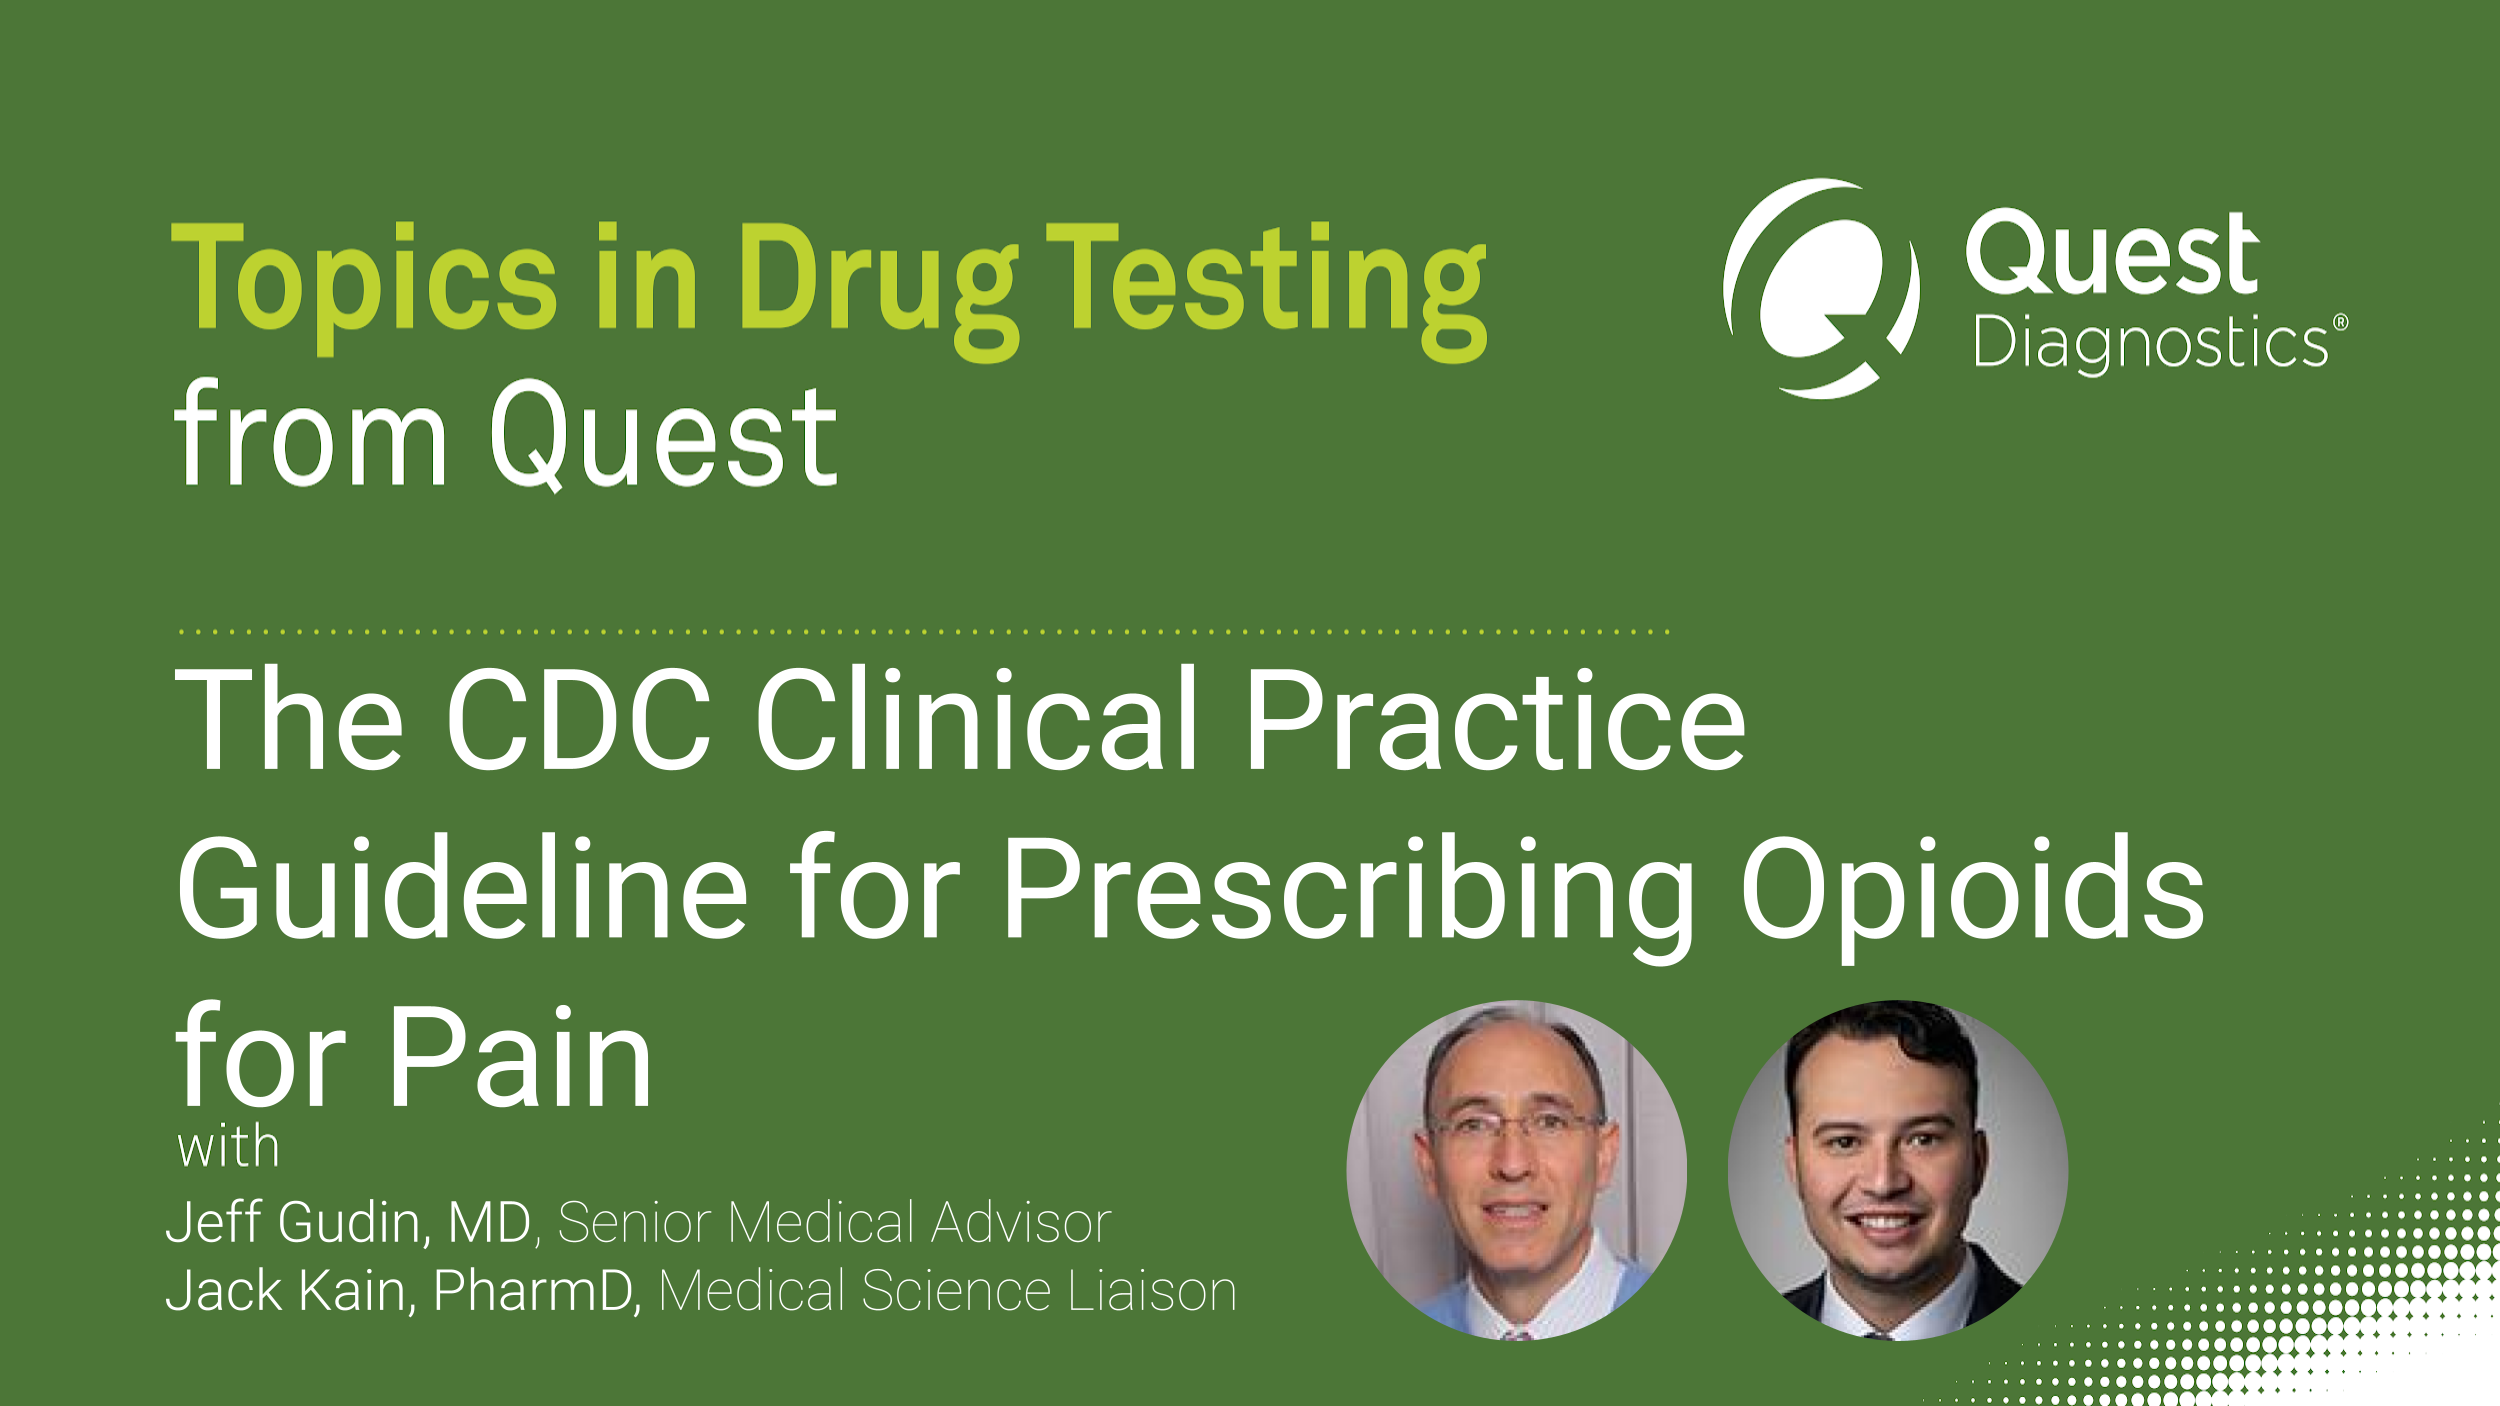 The CDC Clinical Practice Guideline for Prescribing Opiods for Pain